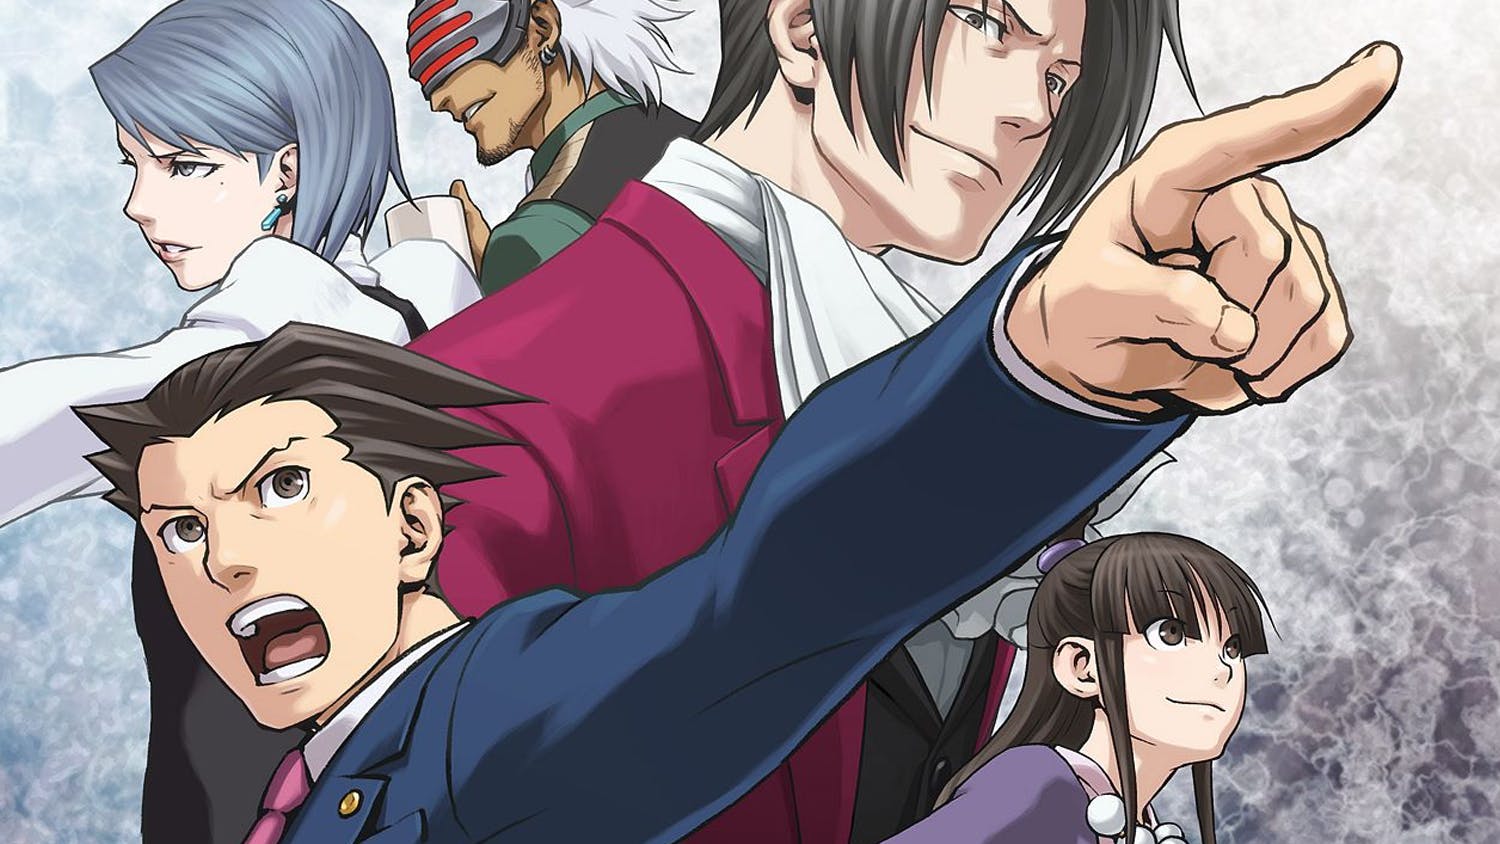 First Look At The Ace Attorney Anime